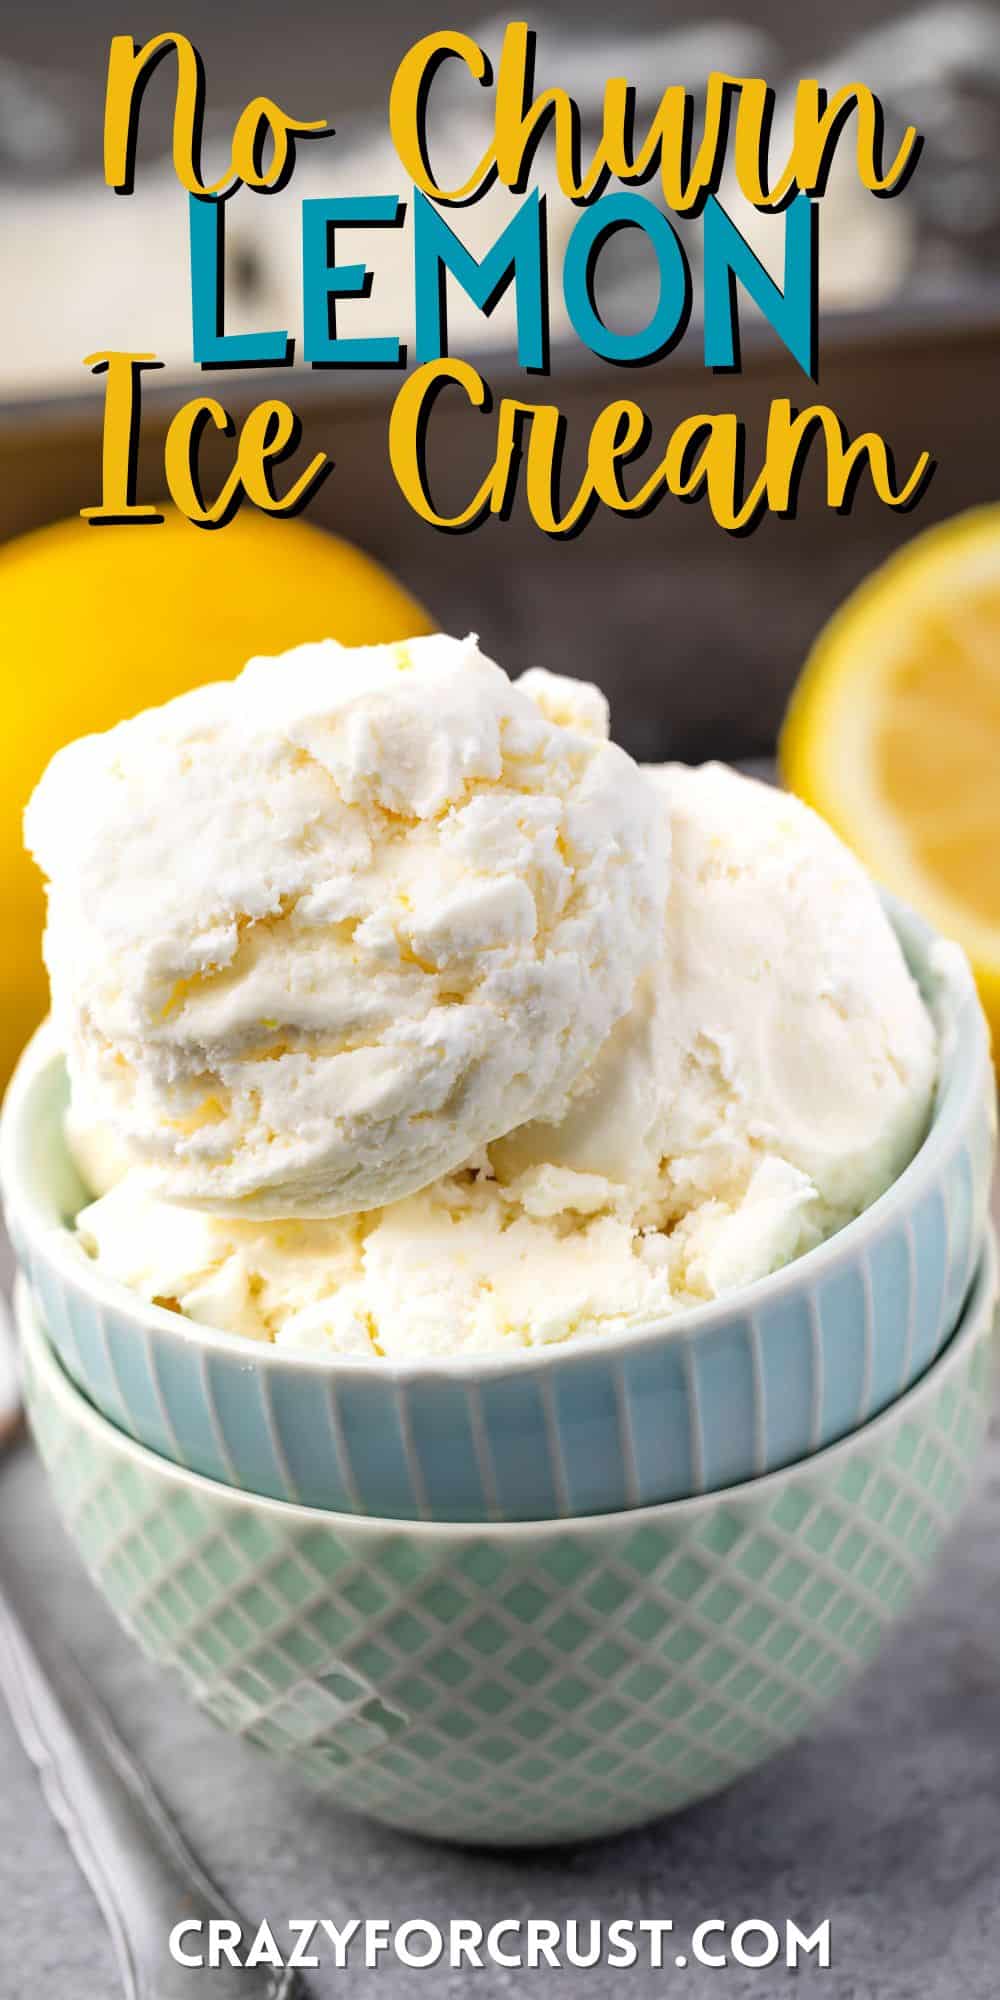 ice cream in two stacked bowls with lemons in the back with words on the image.